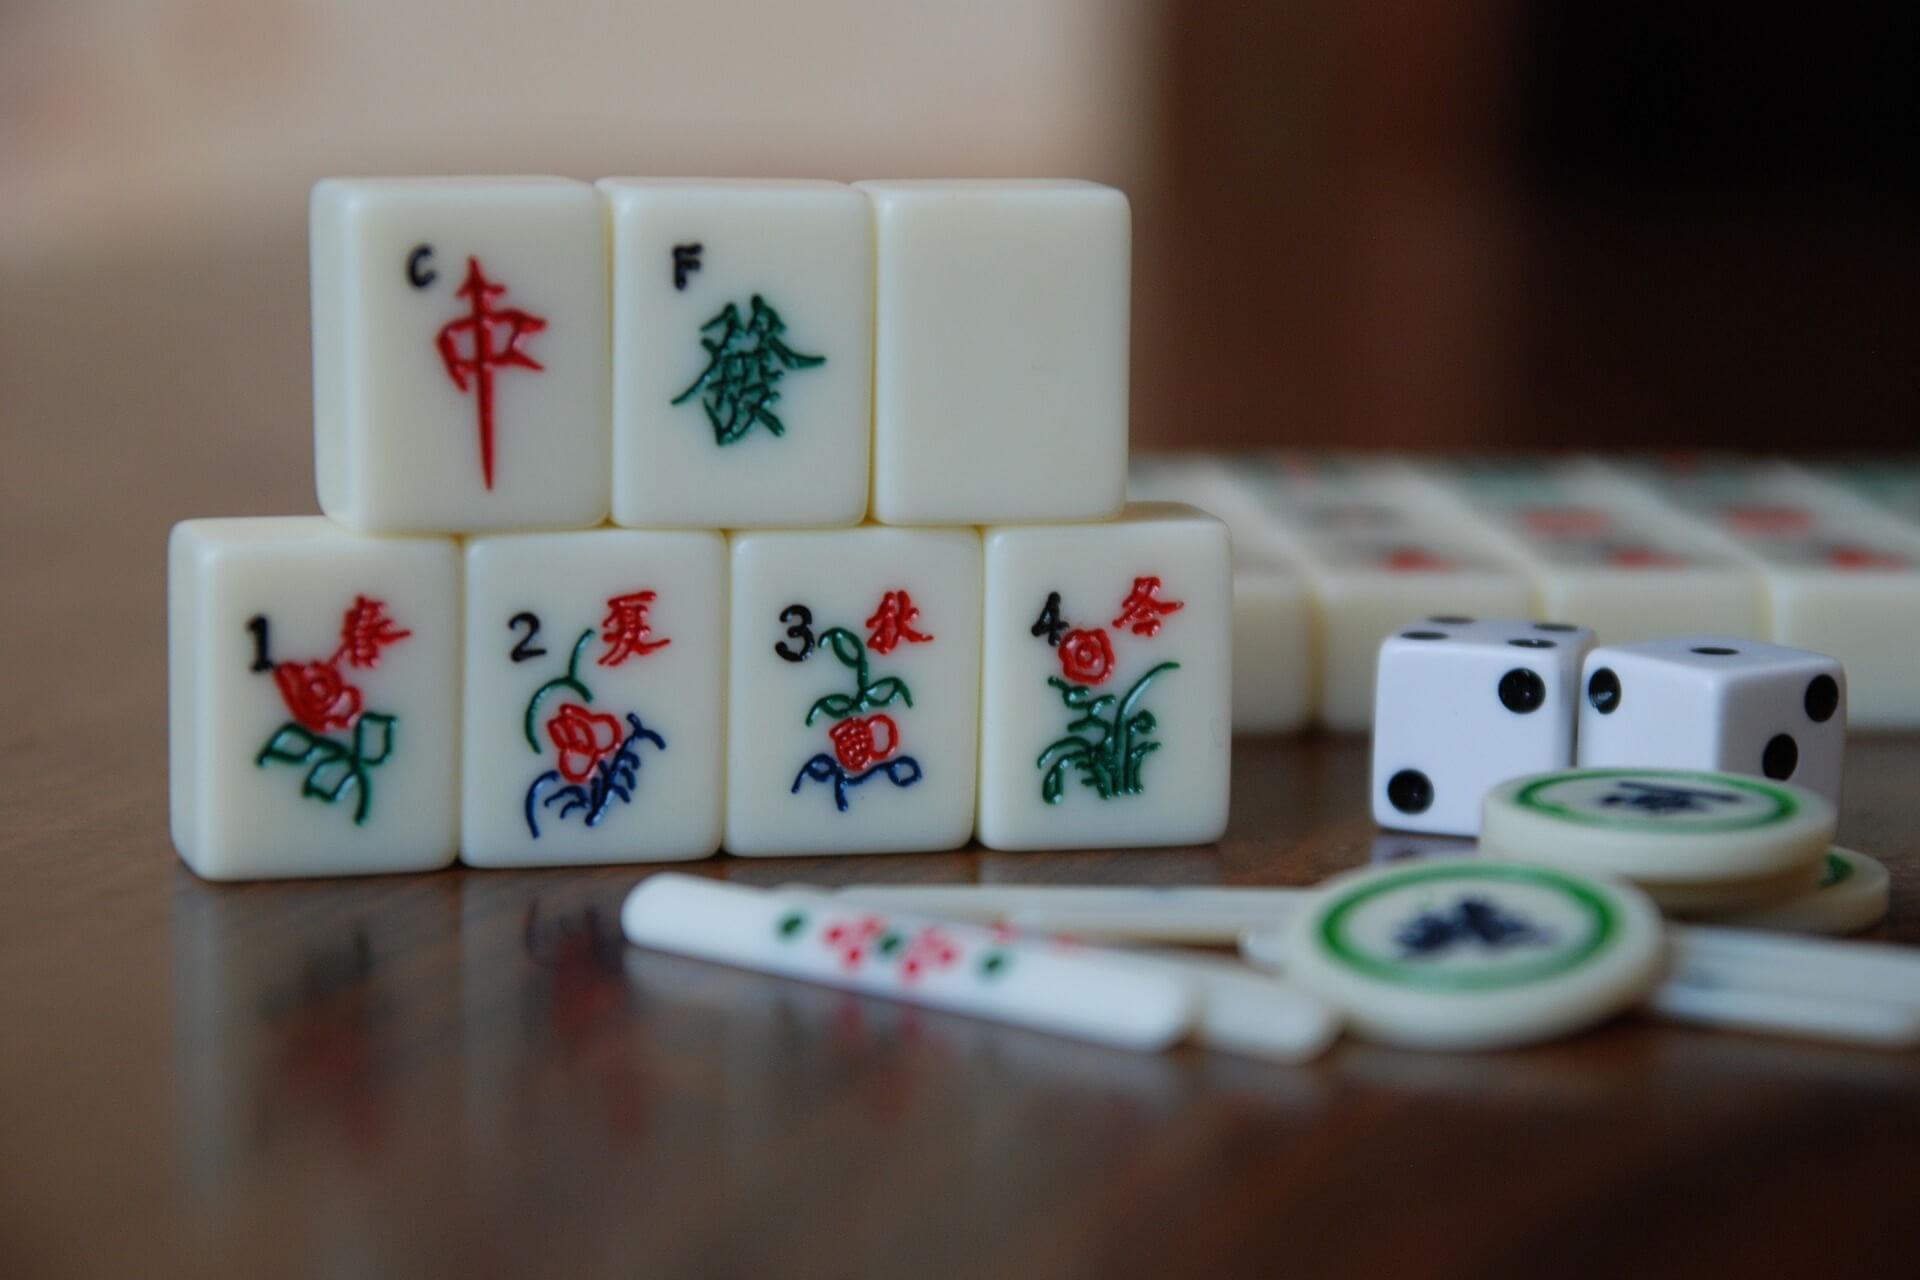 Where to play free online Mahjong games